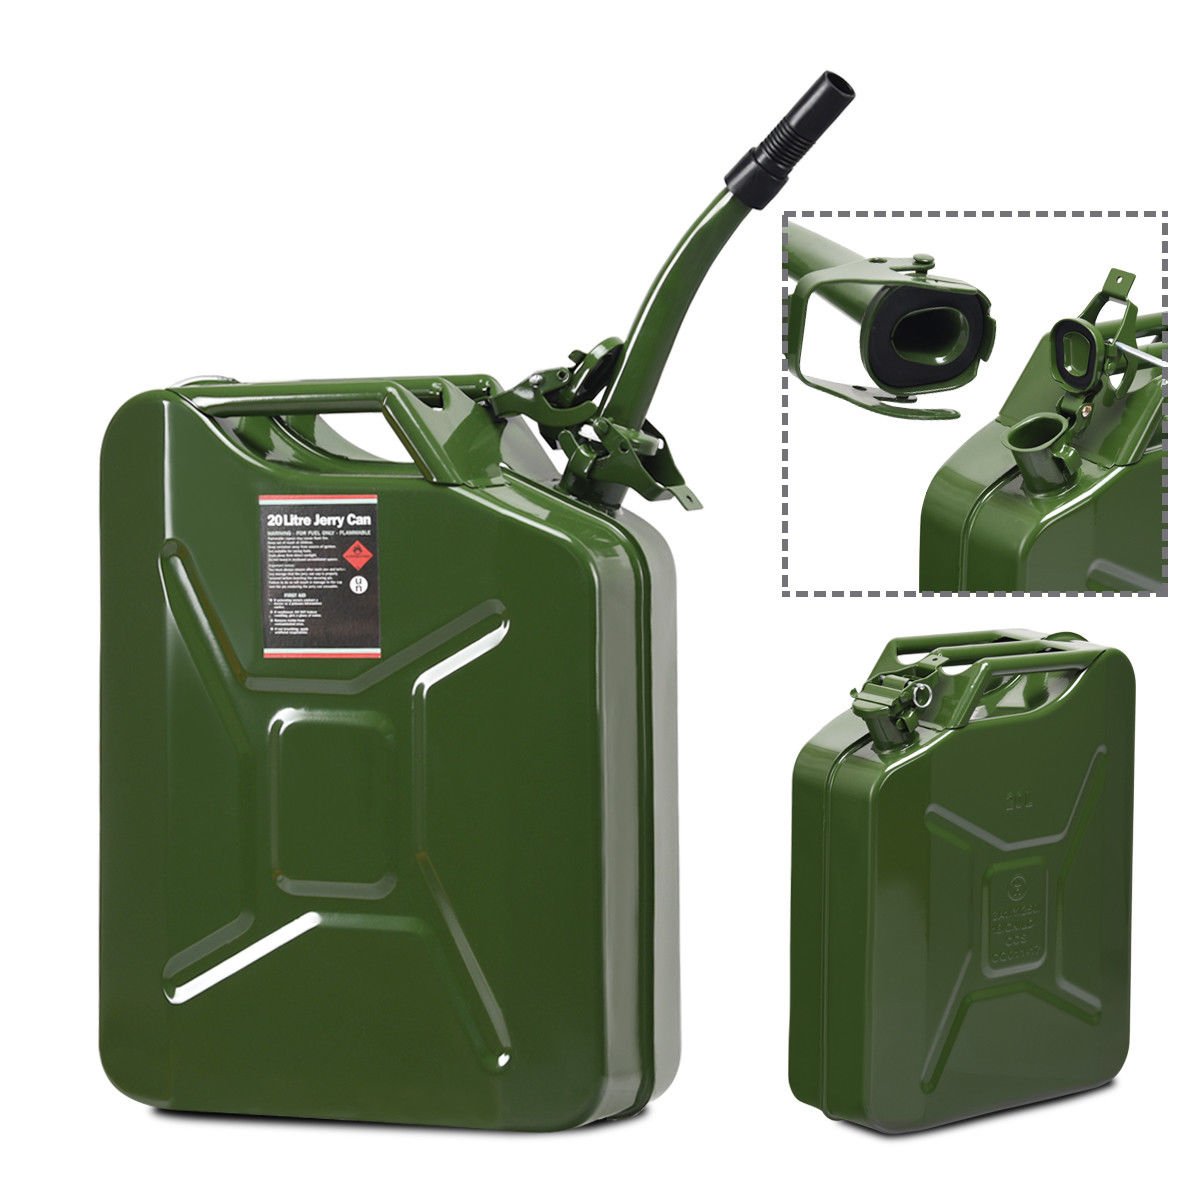 5 Gallon 20L Jerry Fuel Can Steel Gas Container Emergency Backup W/ Spout Green